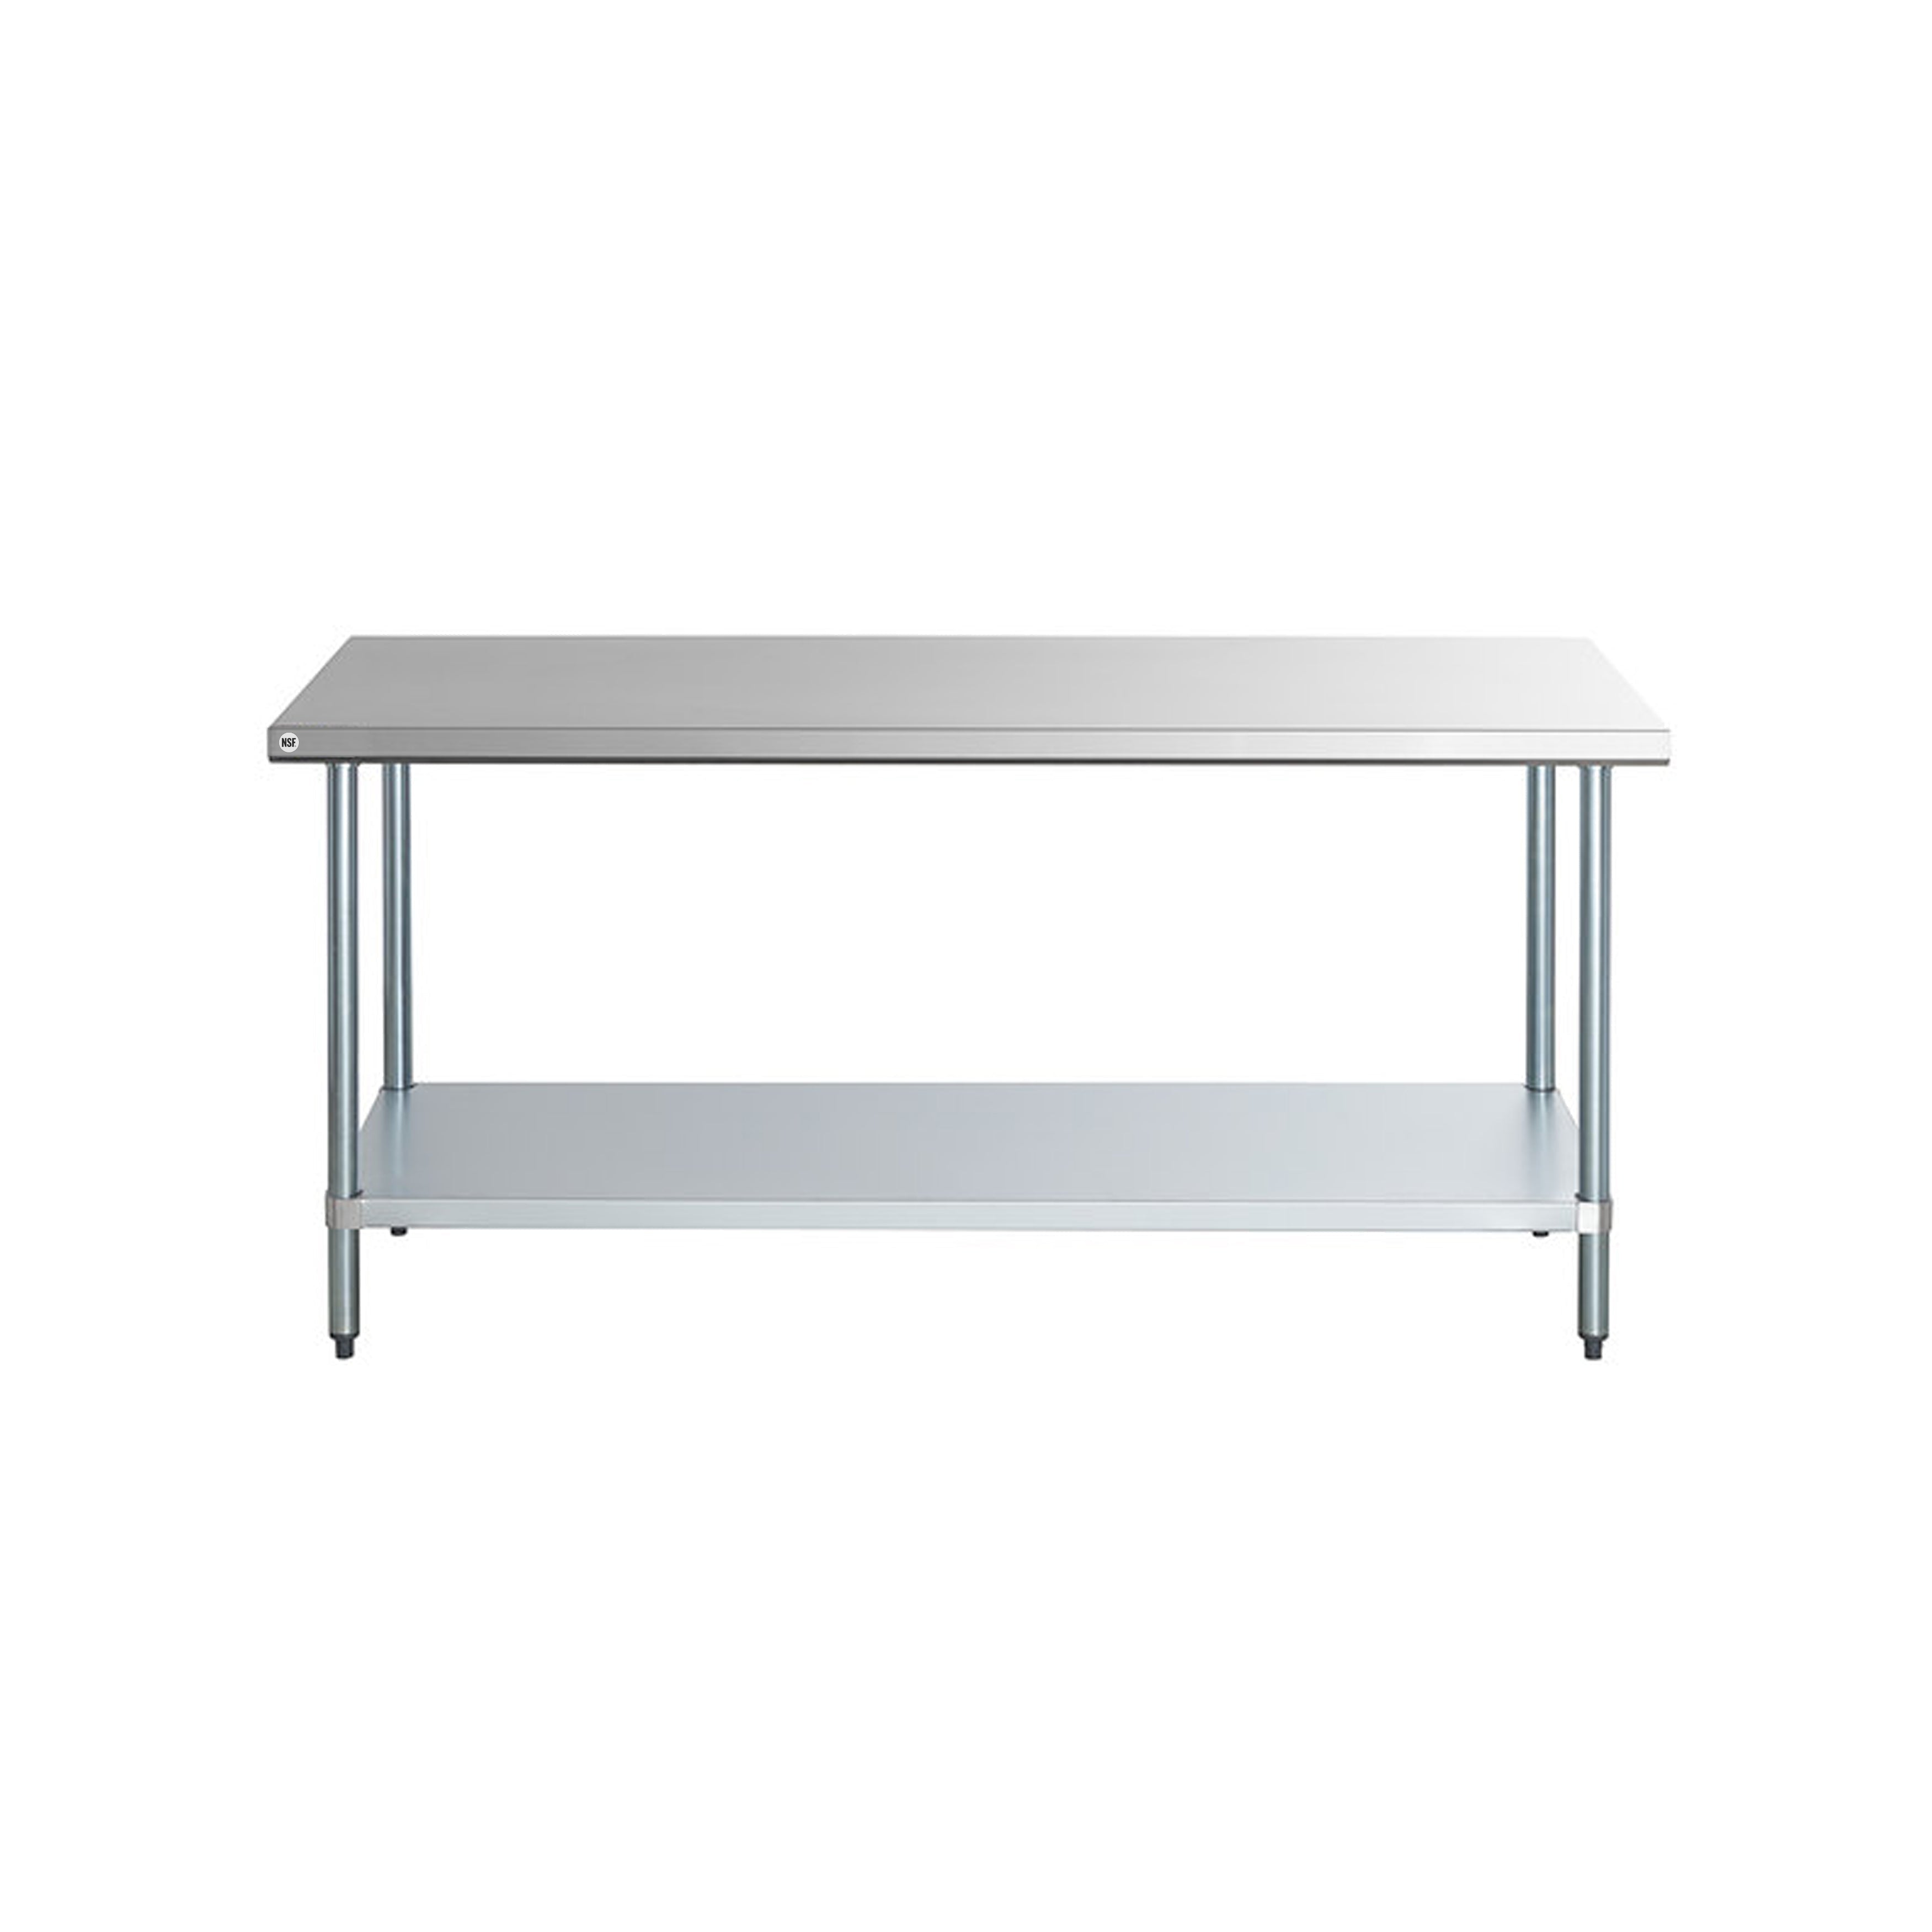 Omcan - 17585, Commercial 36" x 30" Stainless Steel Kitchen Work Table 900lbs Medium Duty